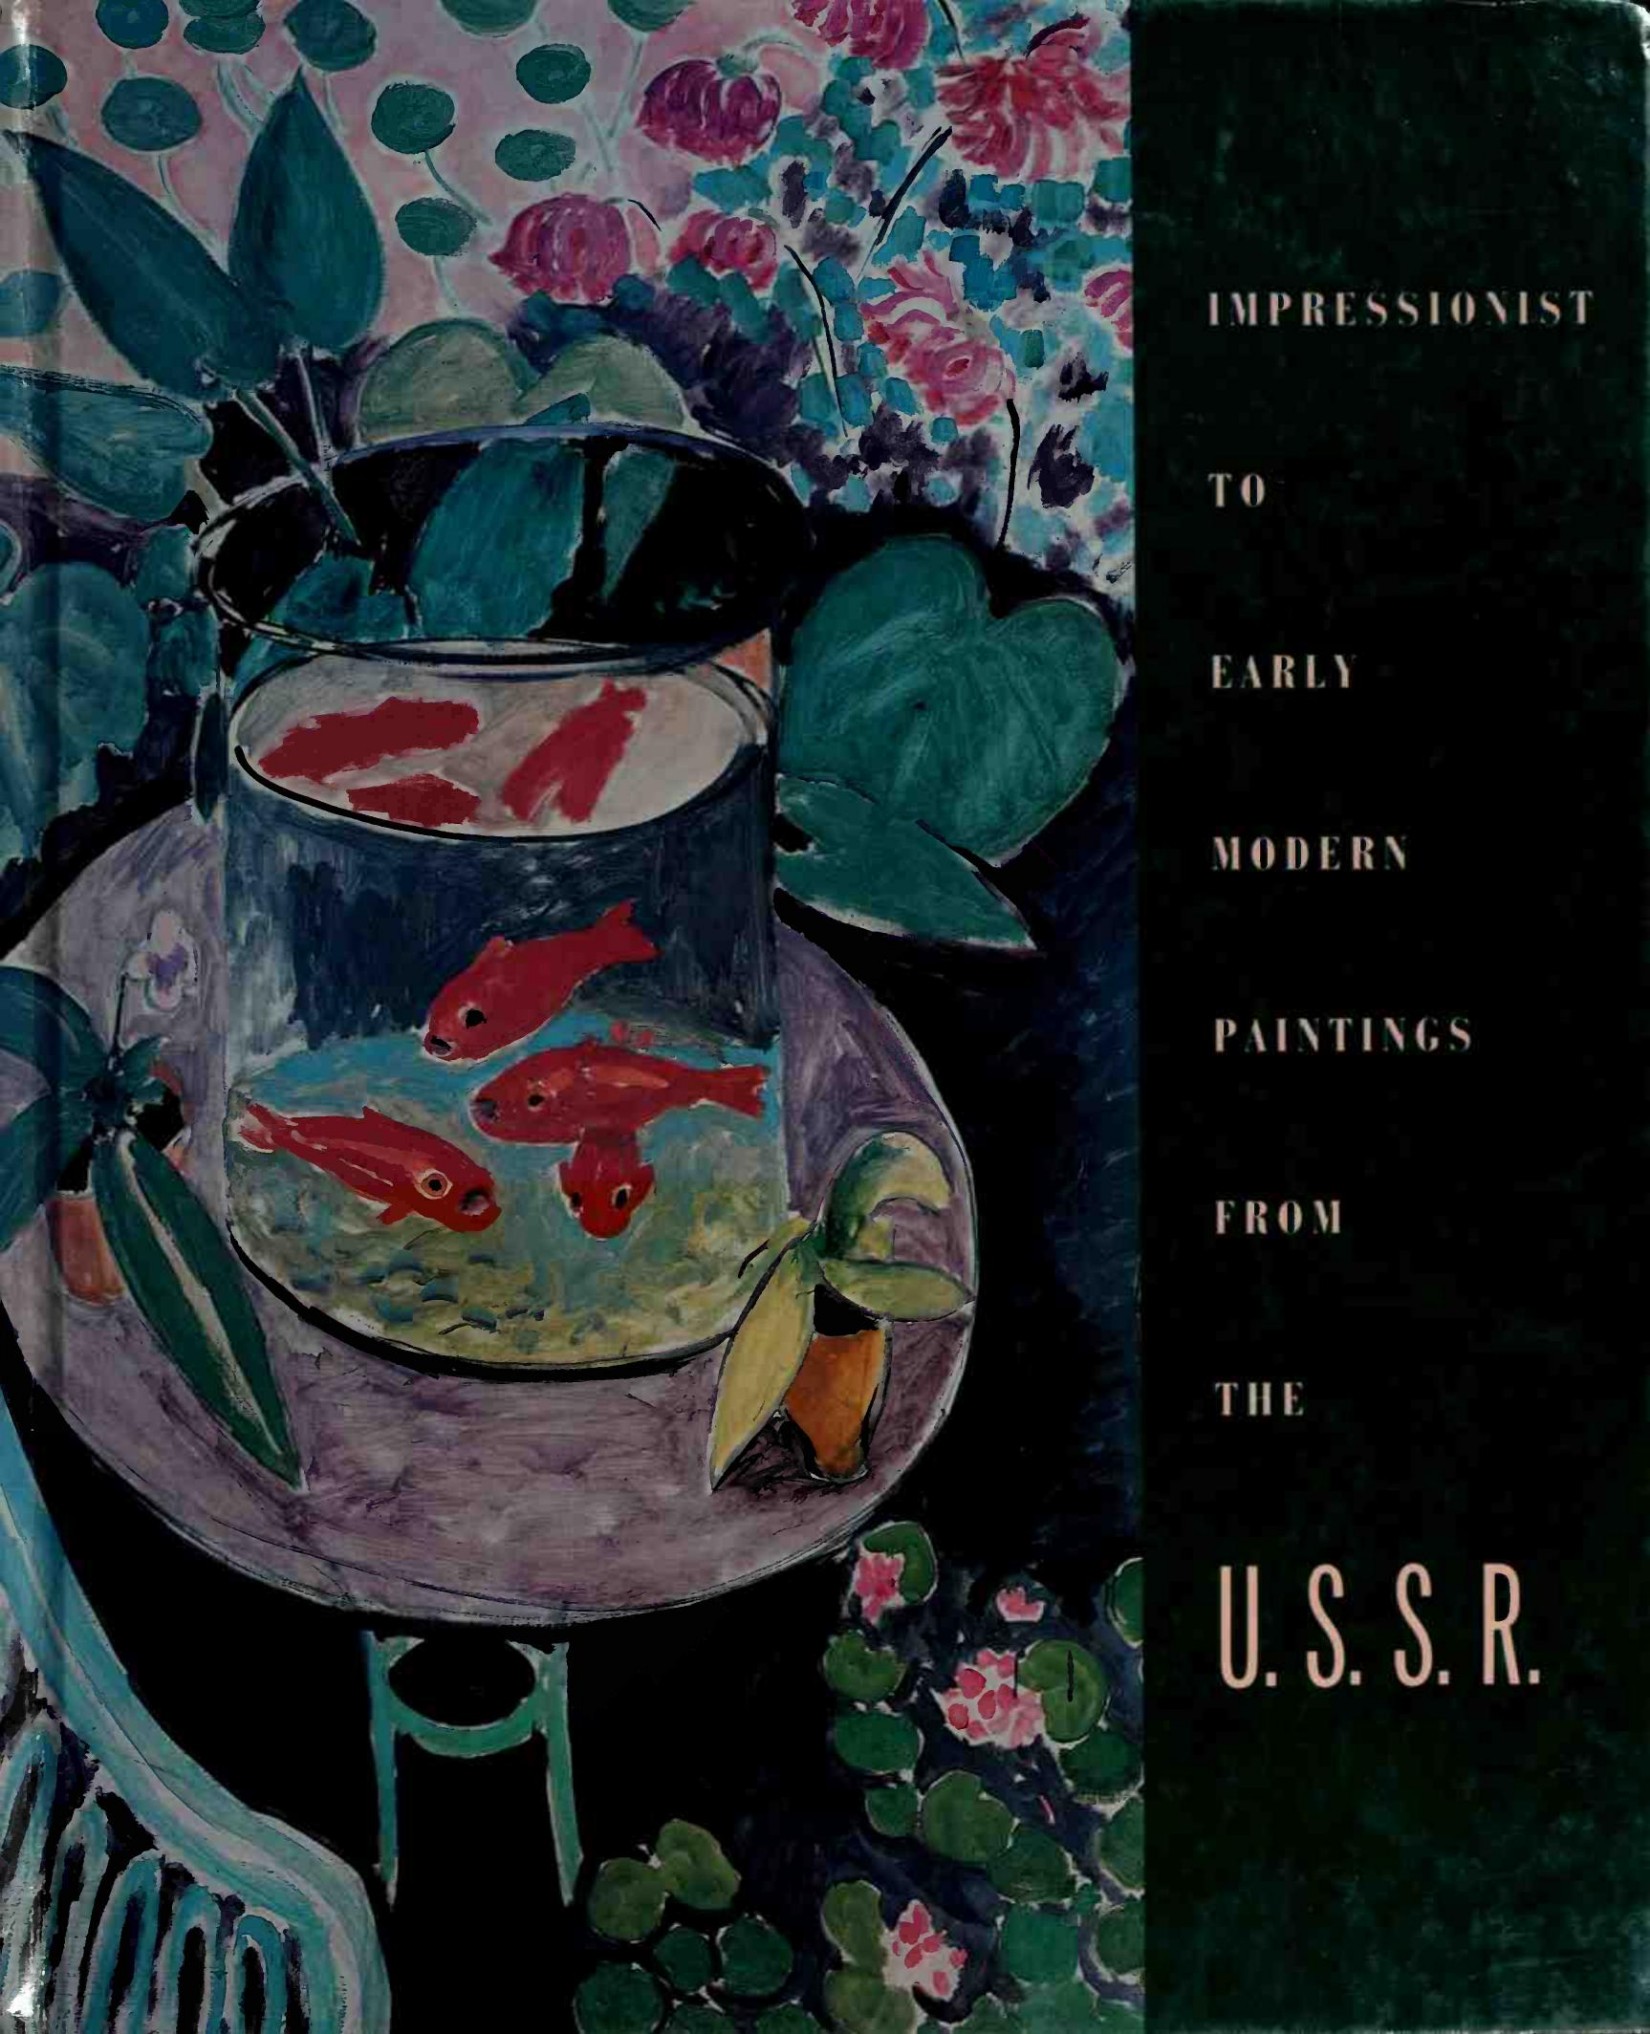 Impressionist to Early Modern Paintings from the U.S.S.R. Works from The Hermitage Museum, Leningrad, 1986